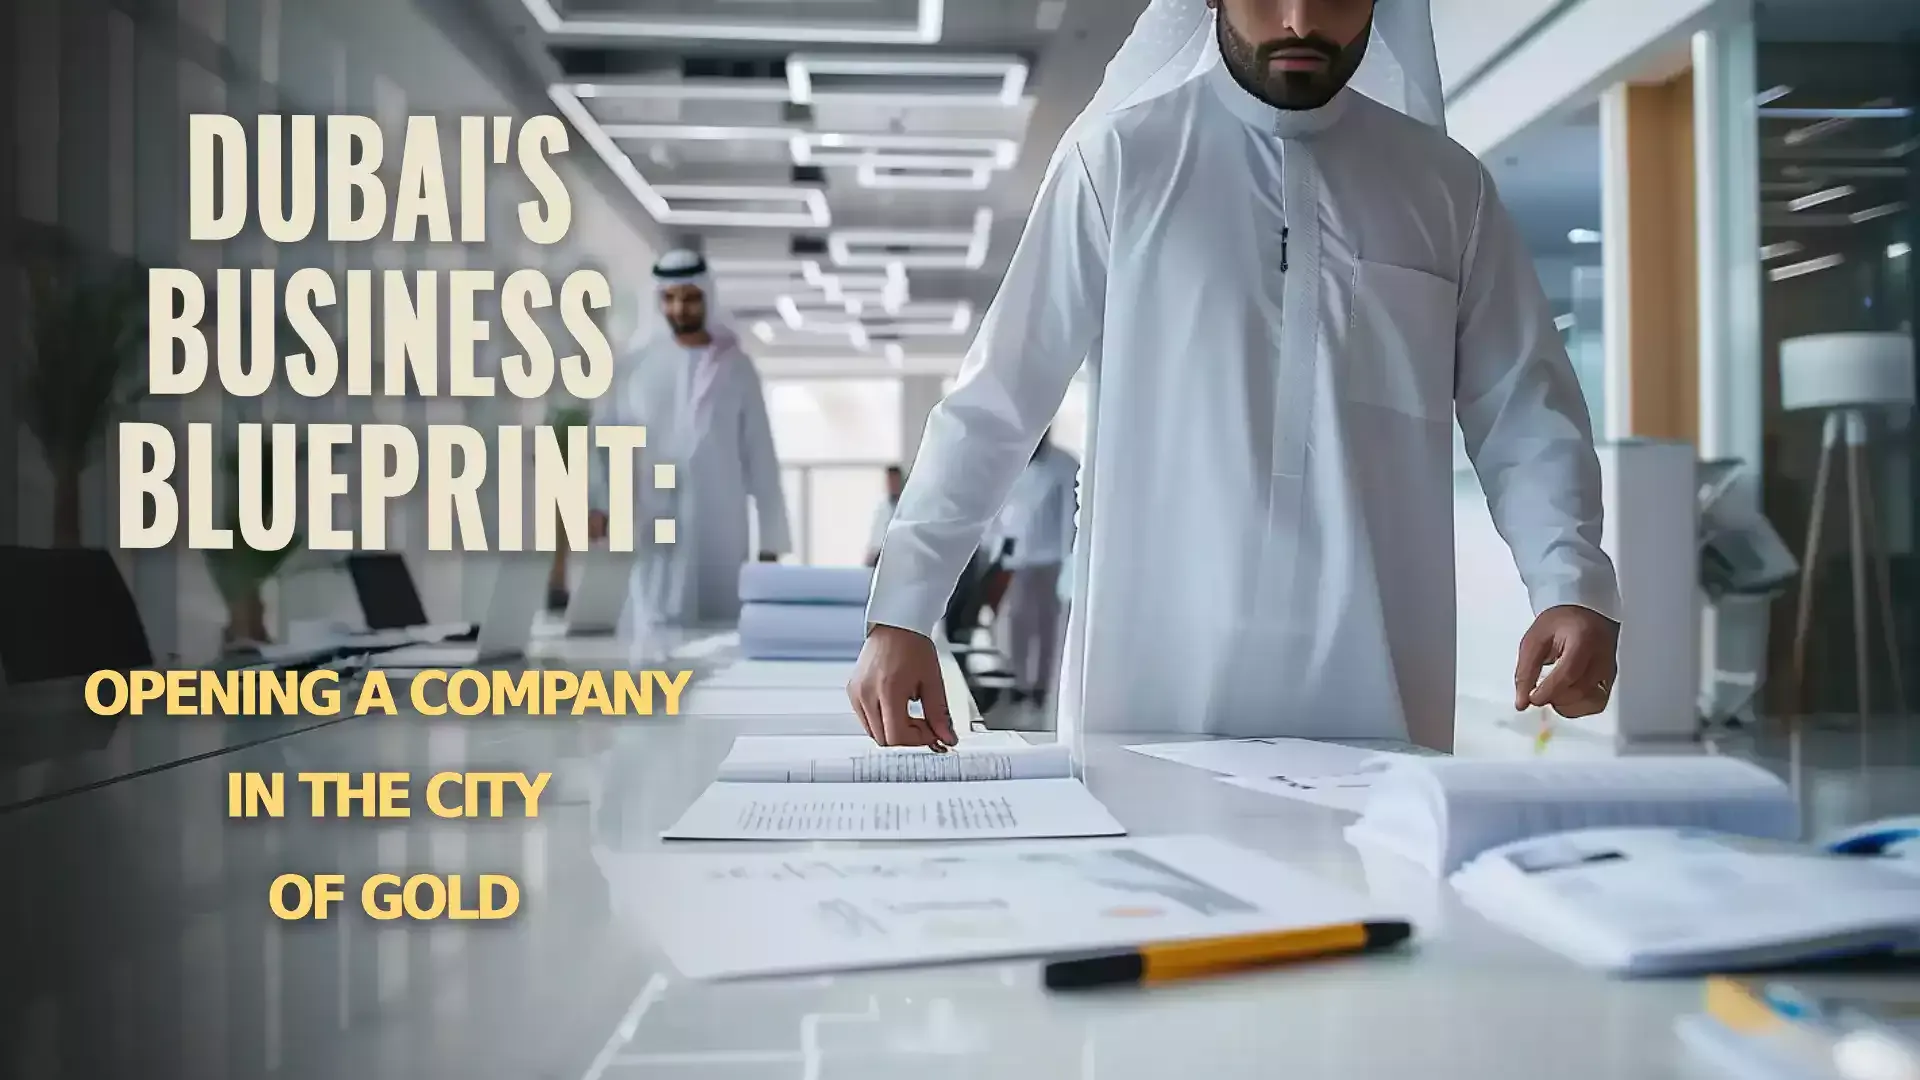 Image: Your Complete Guide to Opening a Company in Dubai